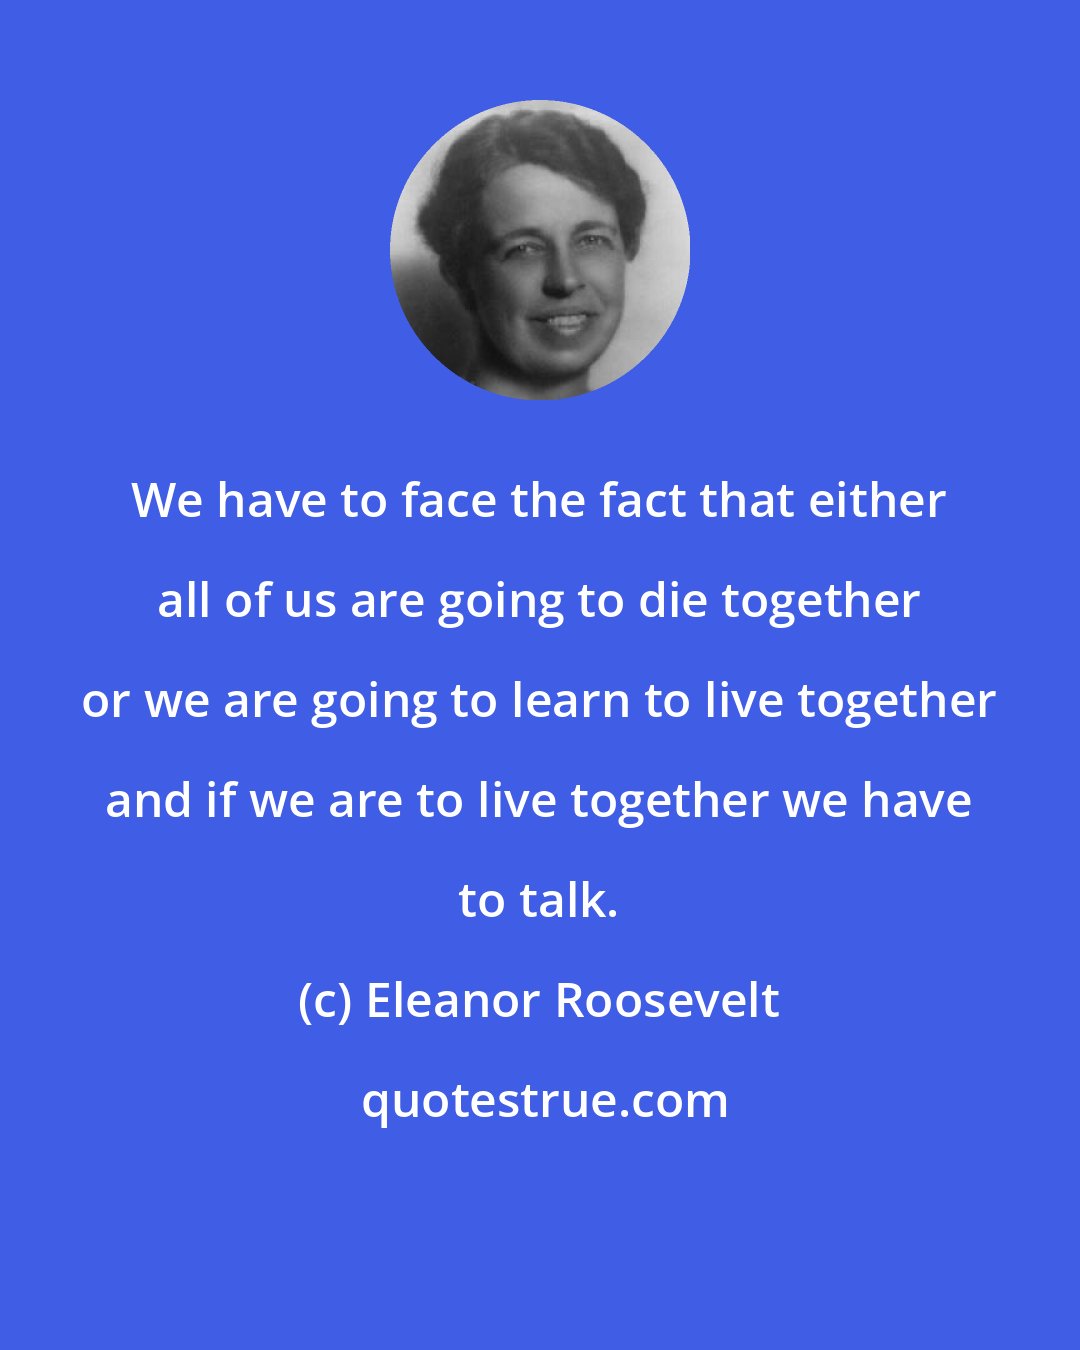 Eleanor Roosevelt: We have to face the fact that either all of us are going to die together or we are going to learn to live together and if we are to live together we have to talk.